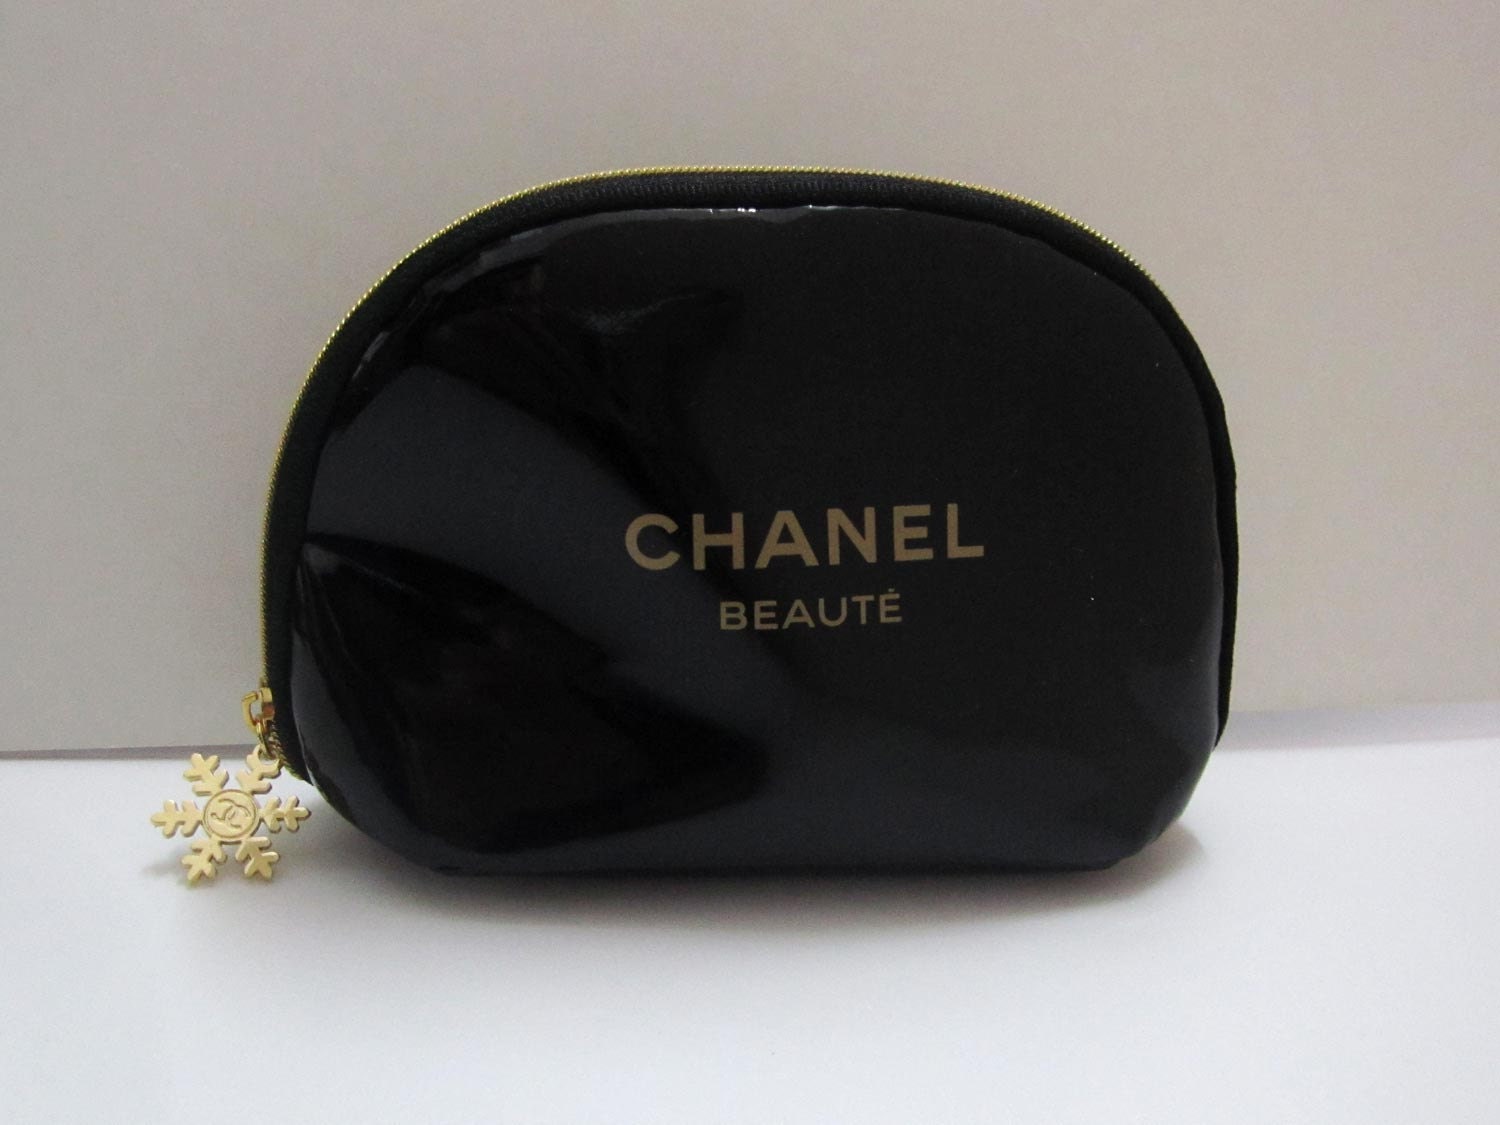 CHANEL BEAUTE Black Gold Snowflake Makeup Cosmetic Bag Pouch Case